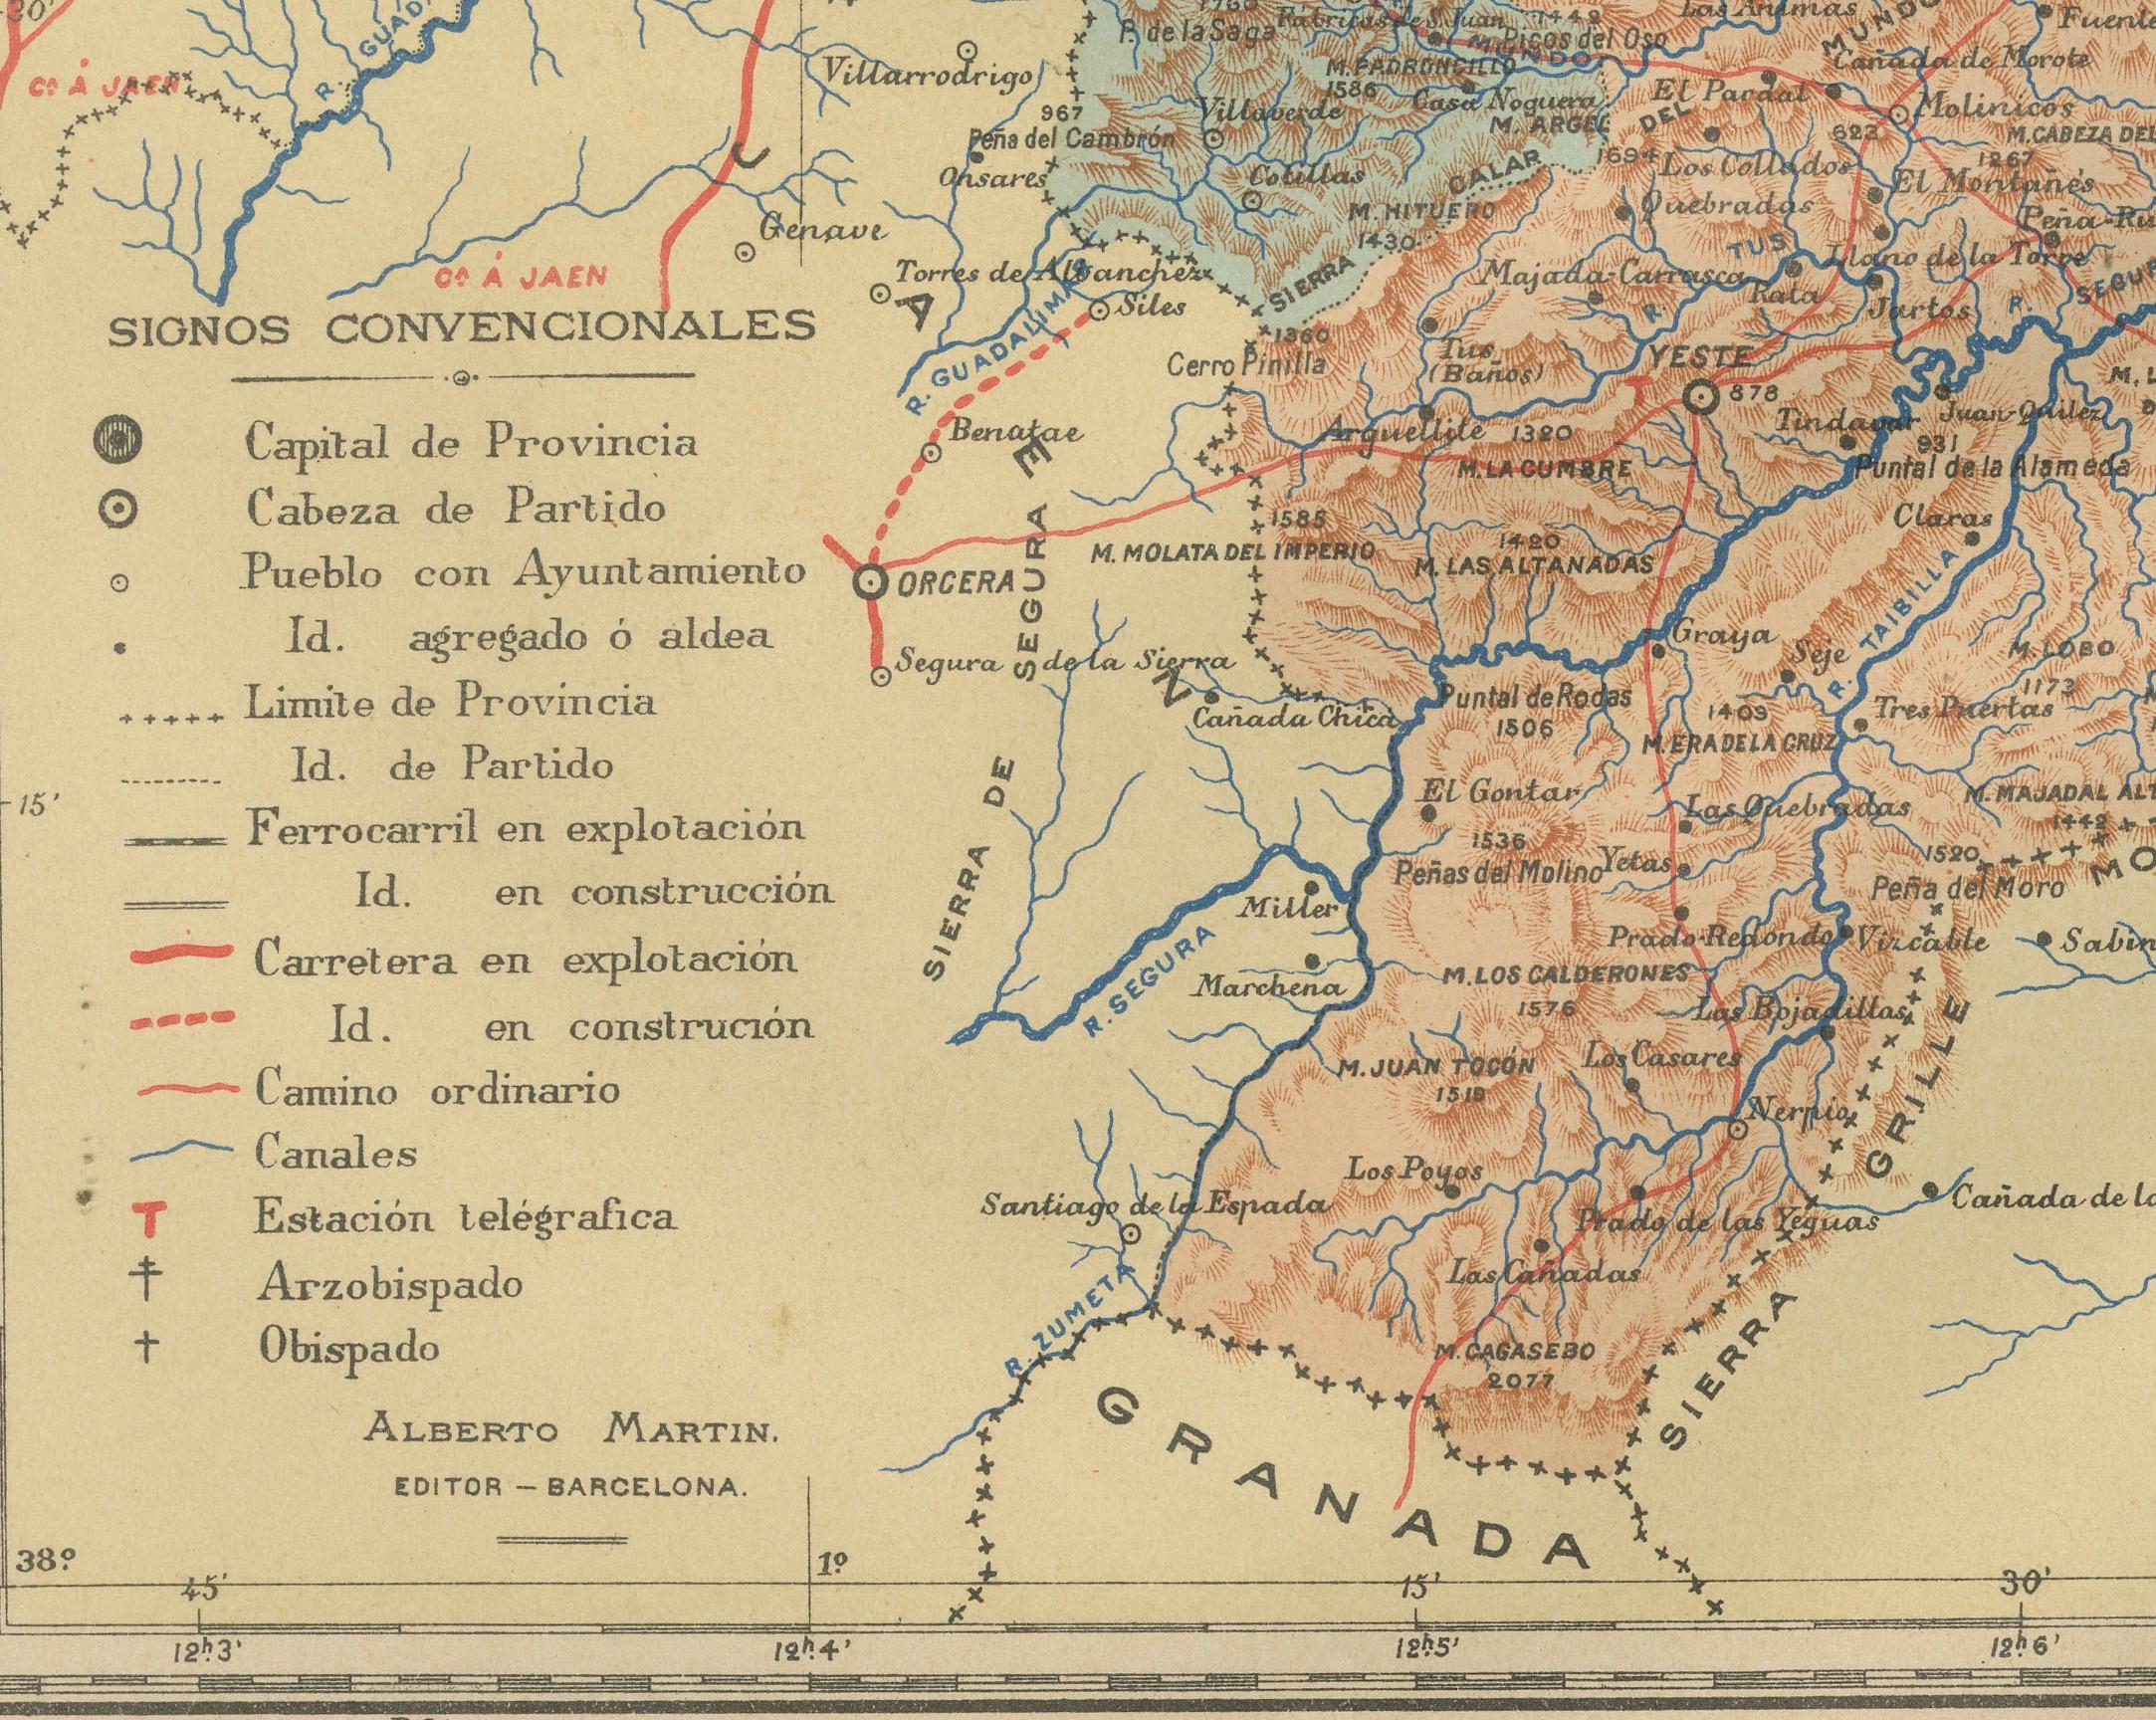 Albacete, Spain - 1902: A Cartographic Depiction of Landscape and Infrastructure

An original and historical map of the province of Albacete, dated 1902, from the 